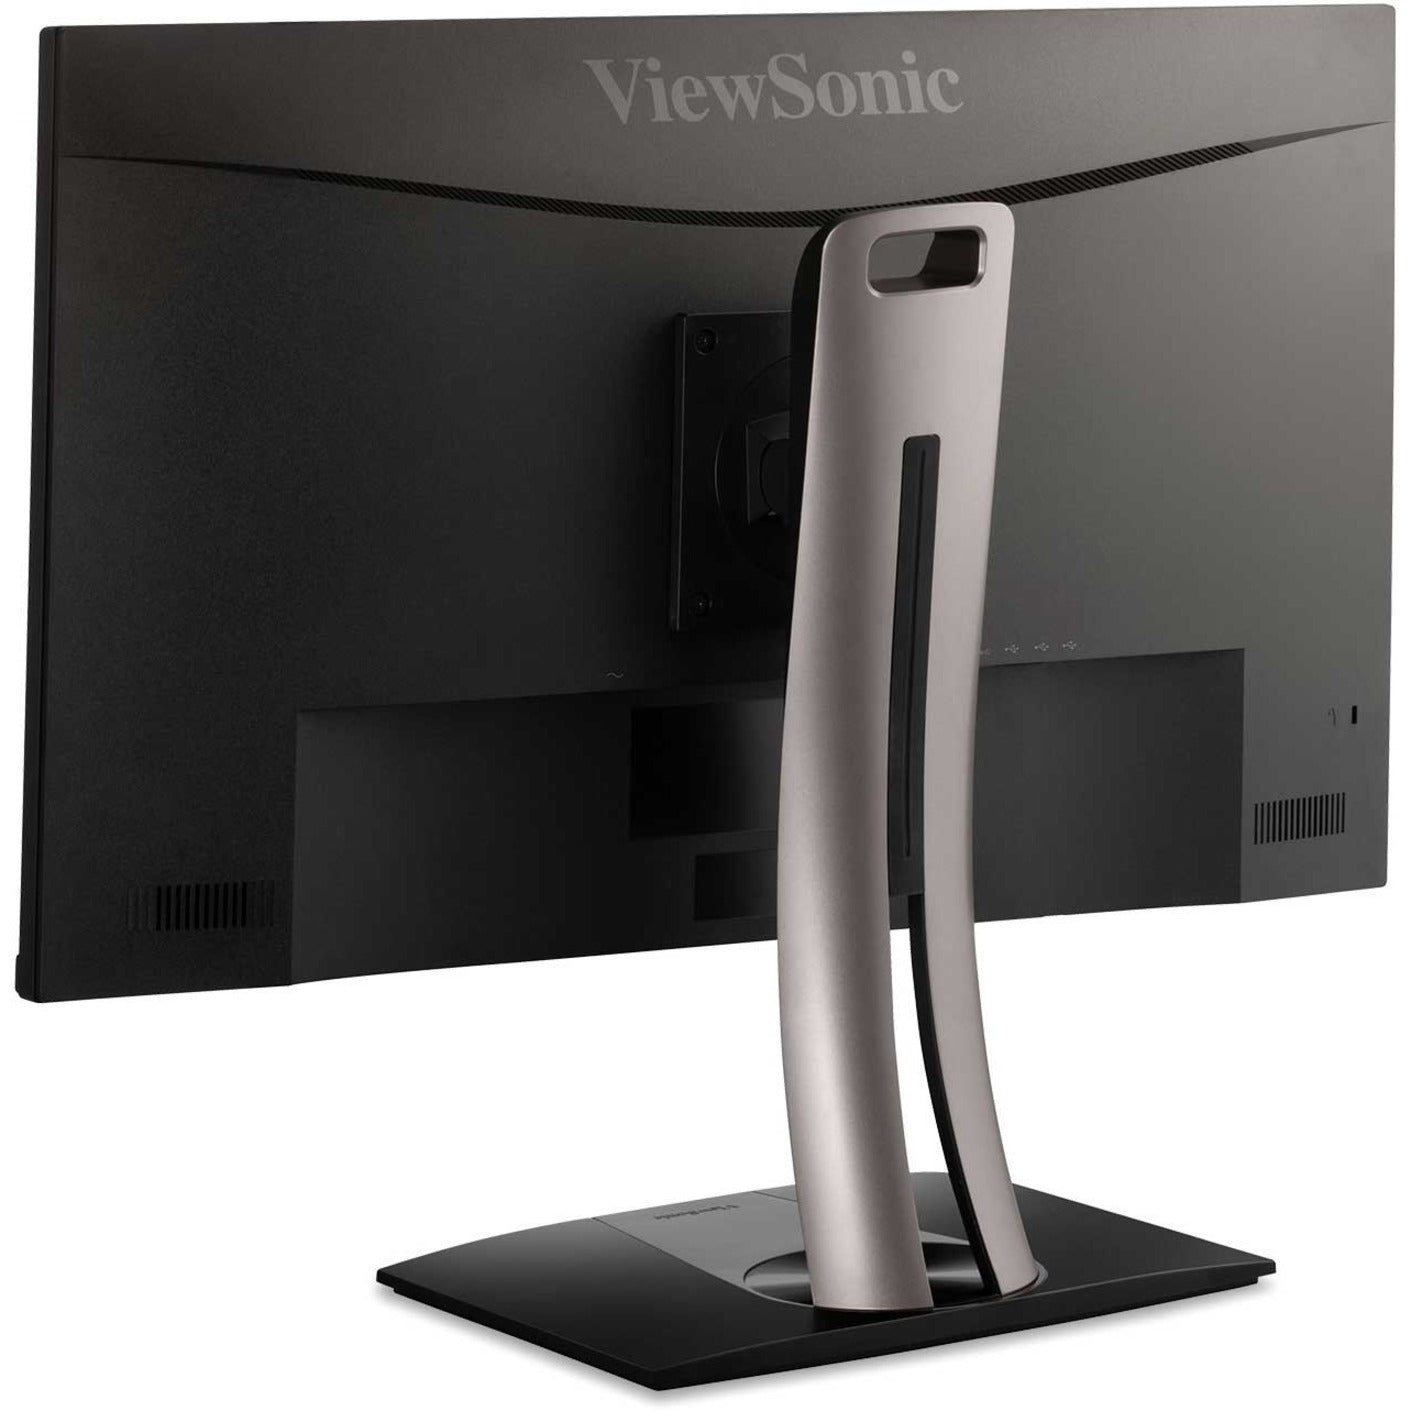 ViewSonic VP2756-2K 27 Inch Premium IPS 1440p Ergonomic Monitor with Ultra-Thin Bezels Color Accuracy Pantone Validated HDMI DisplayPort and USB C for Professional Home and Office